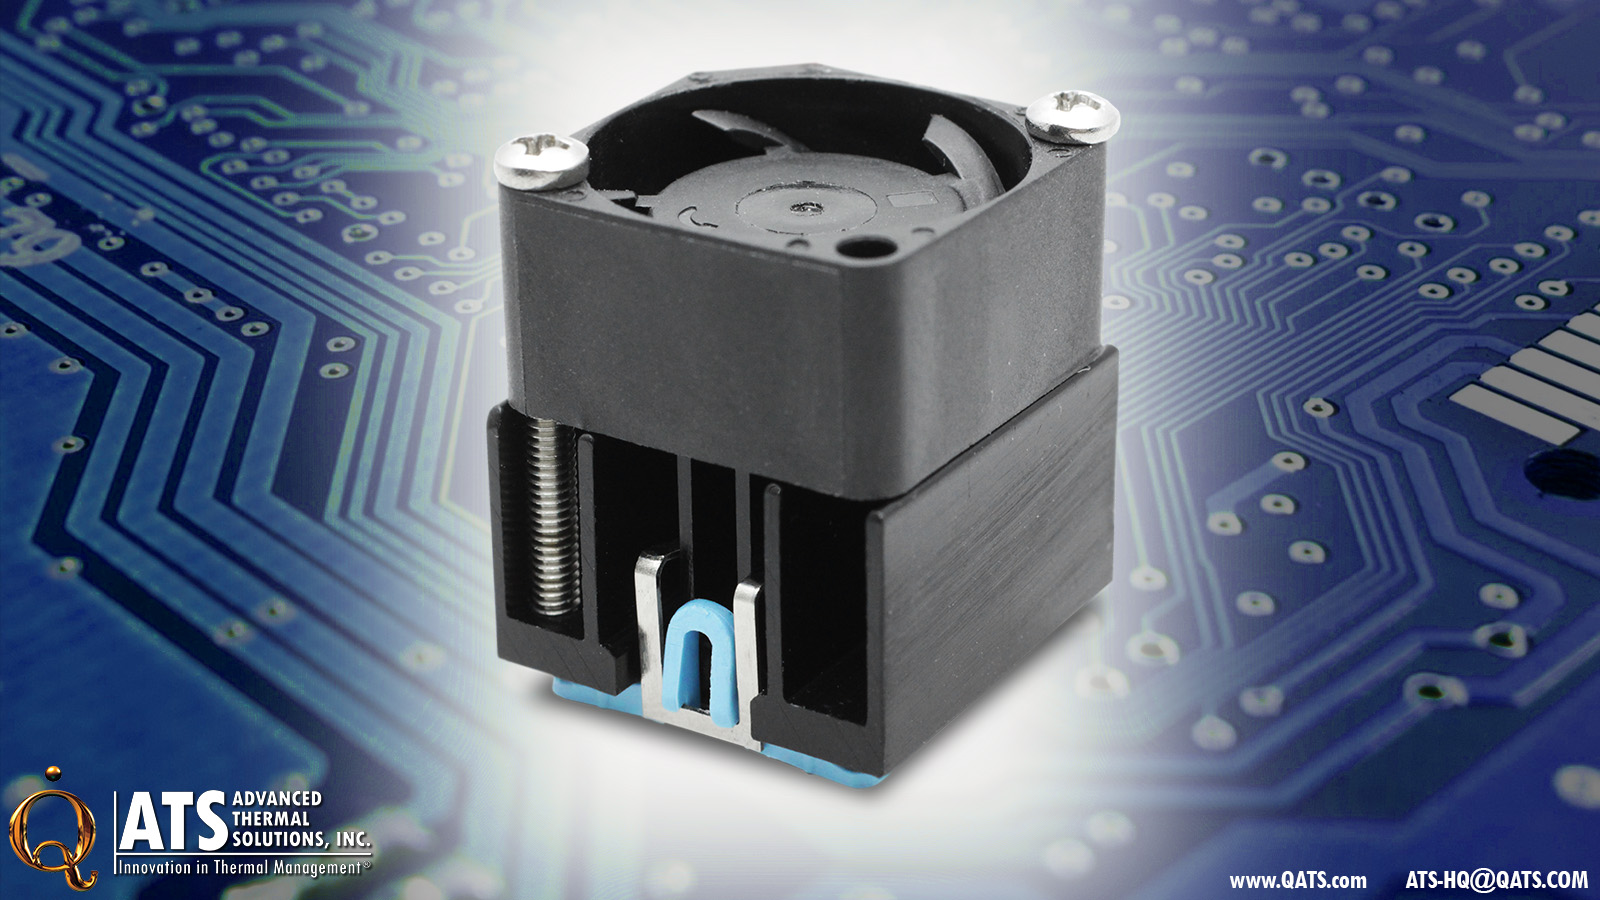 Fan-Assisted Heat Sinks are Designed for Analog Devices Evaluation Boards